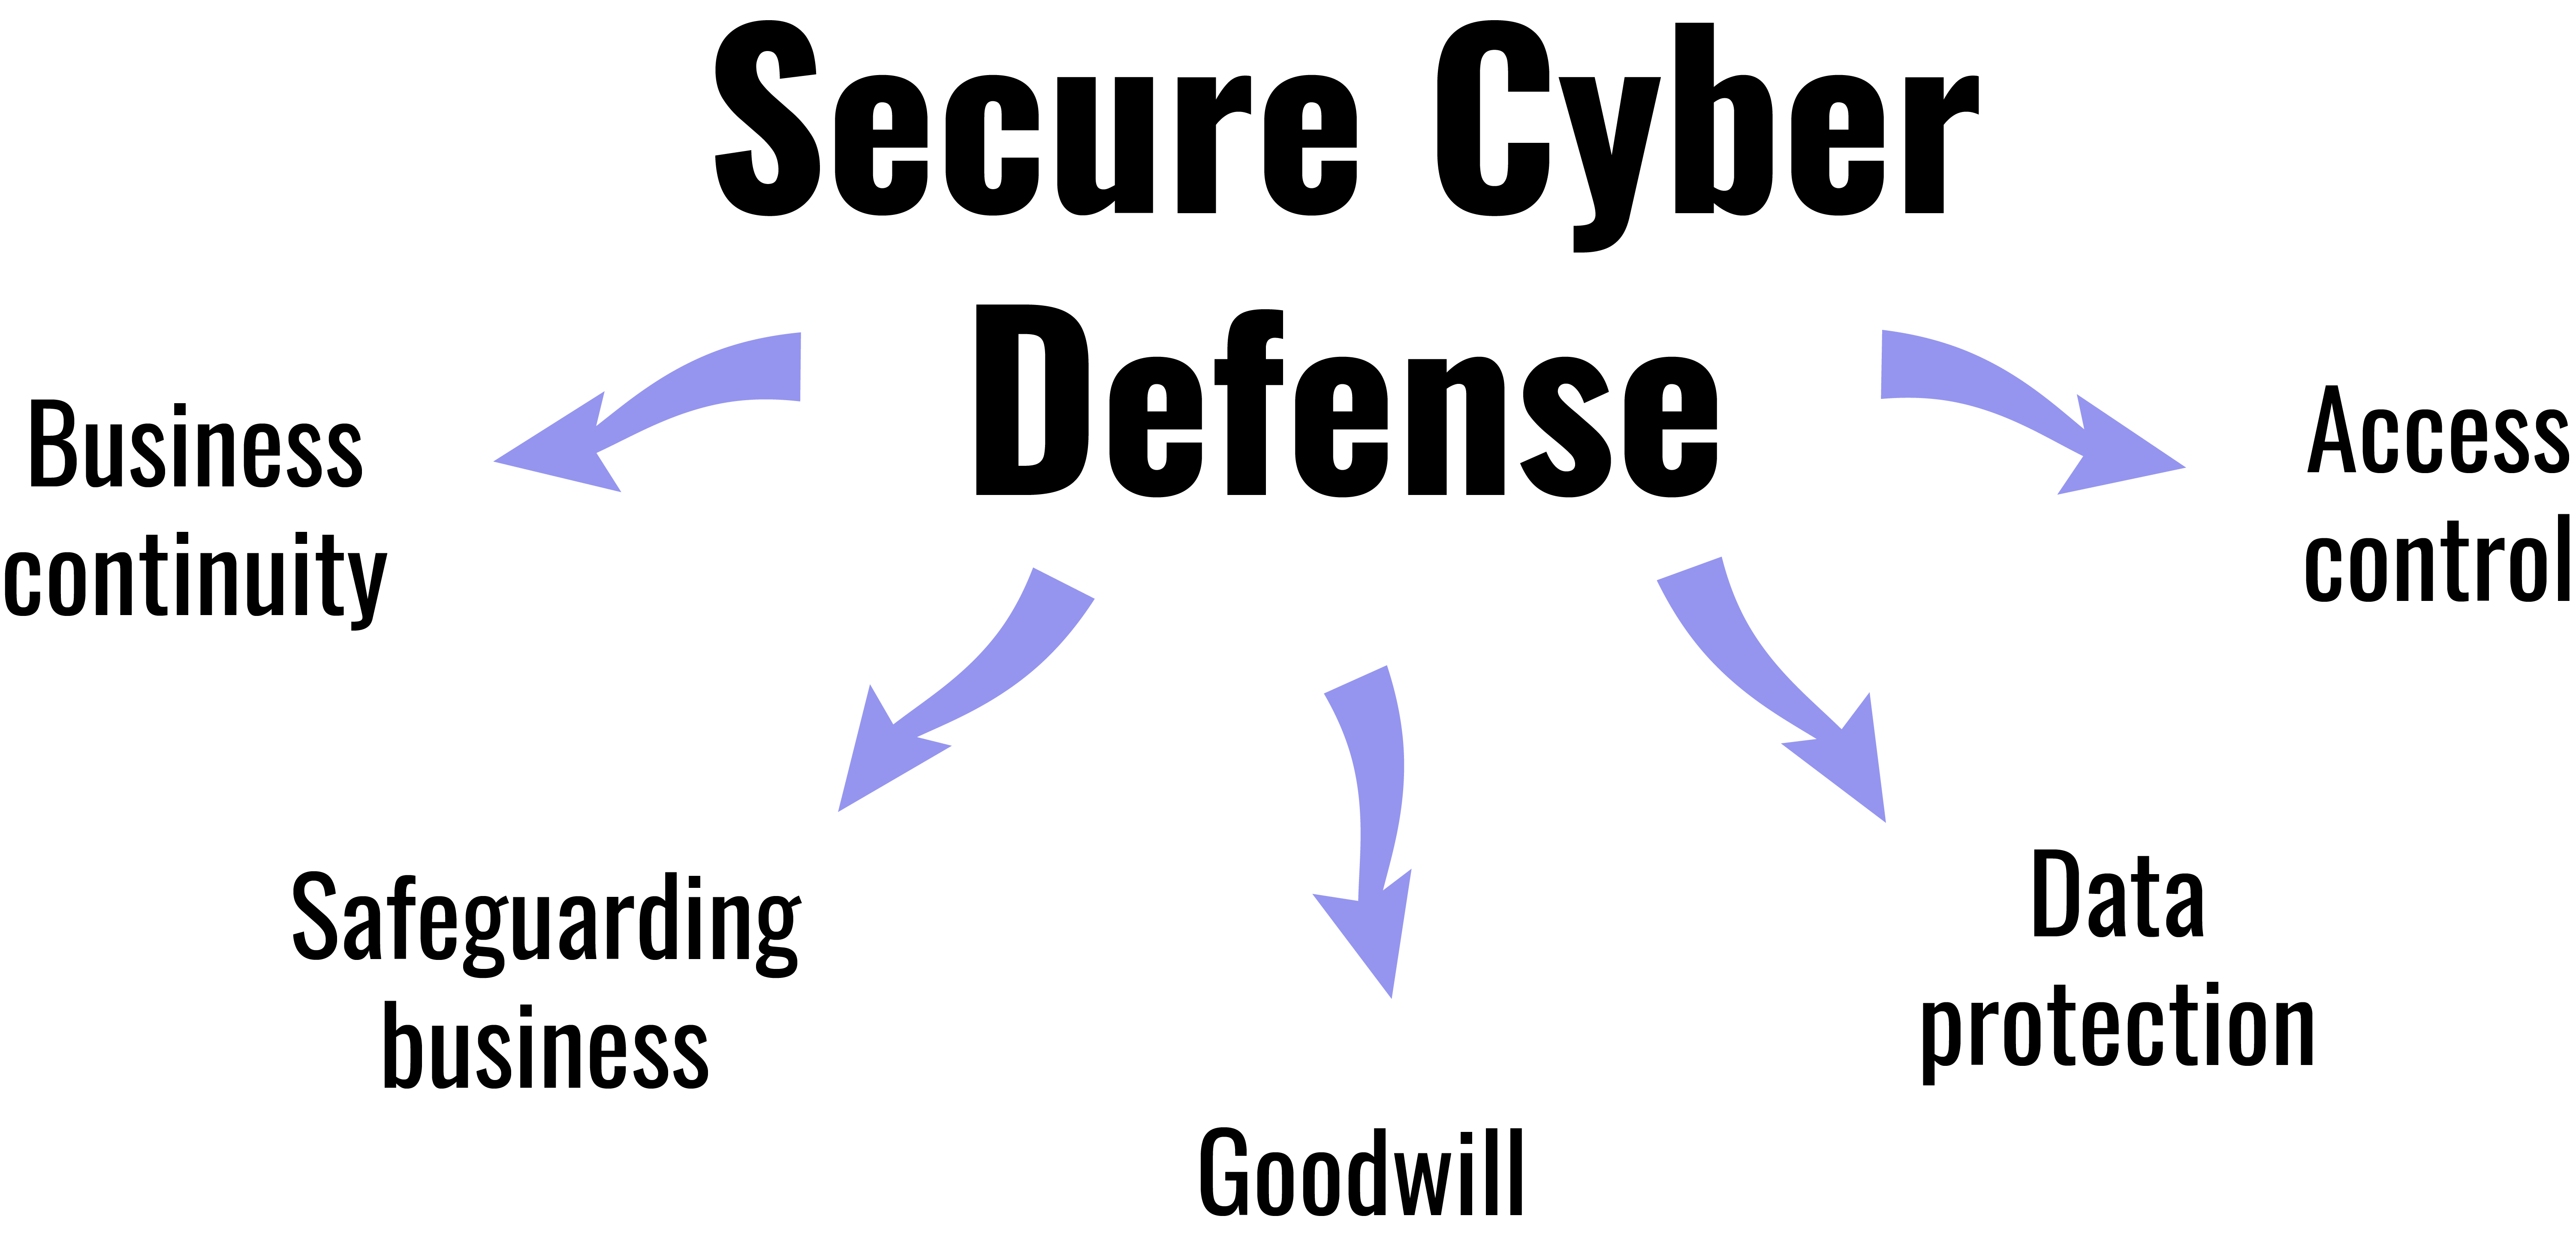 Secure Cyber Defence 